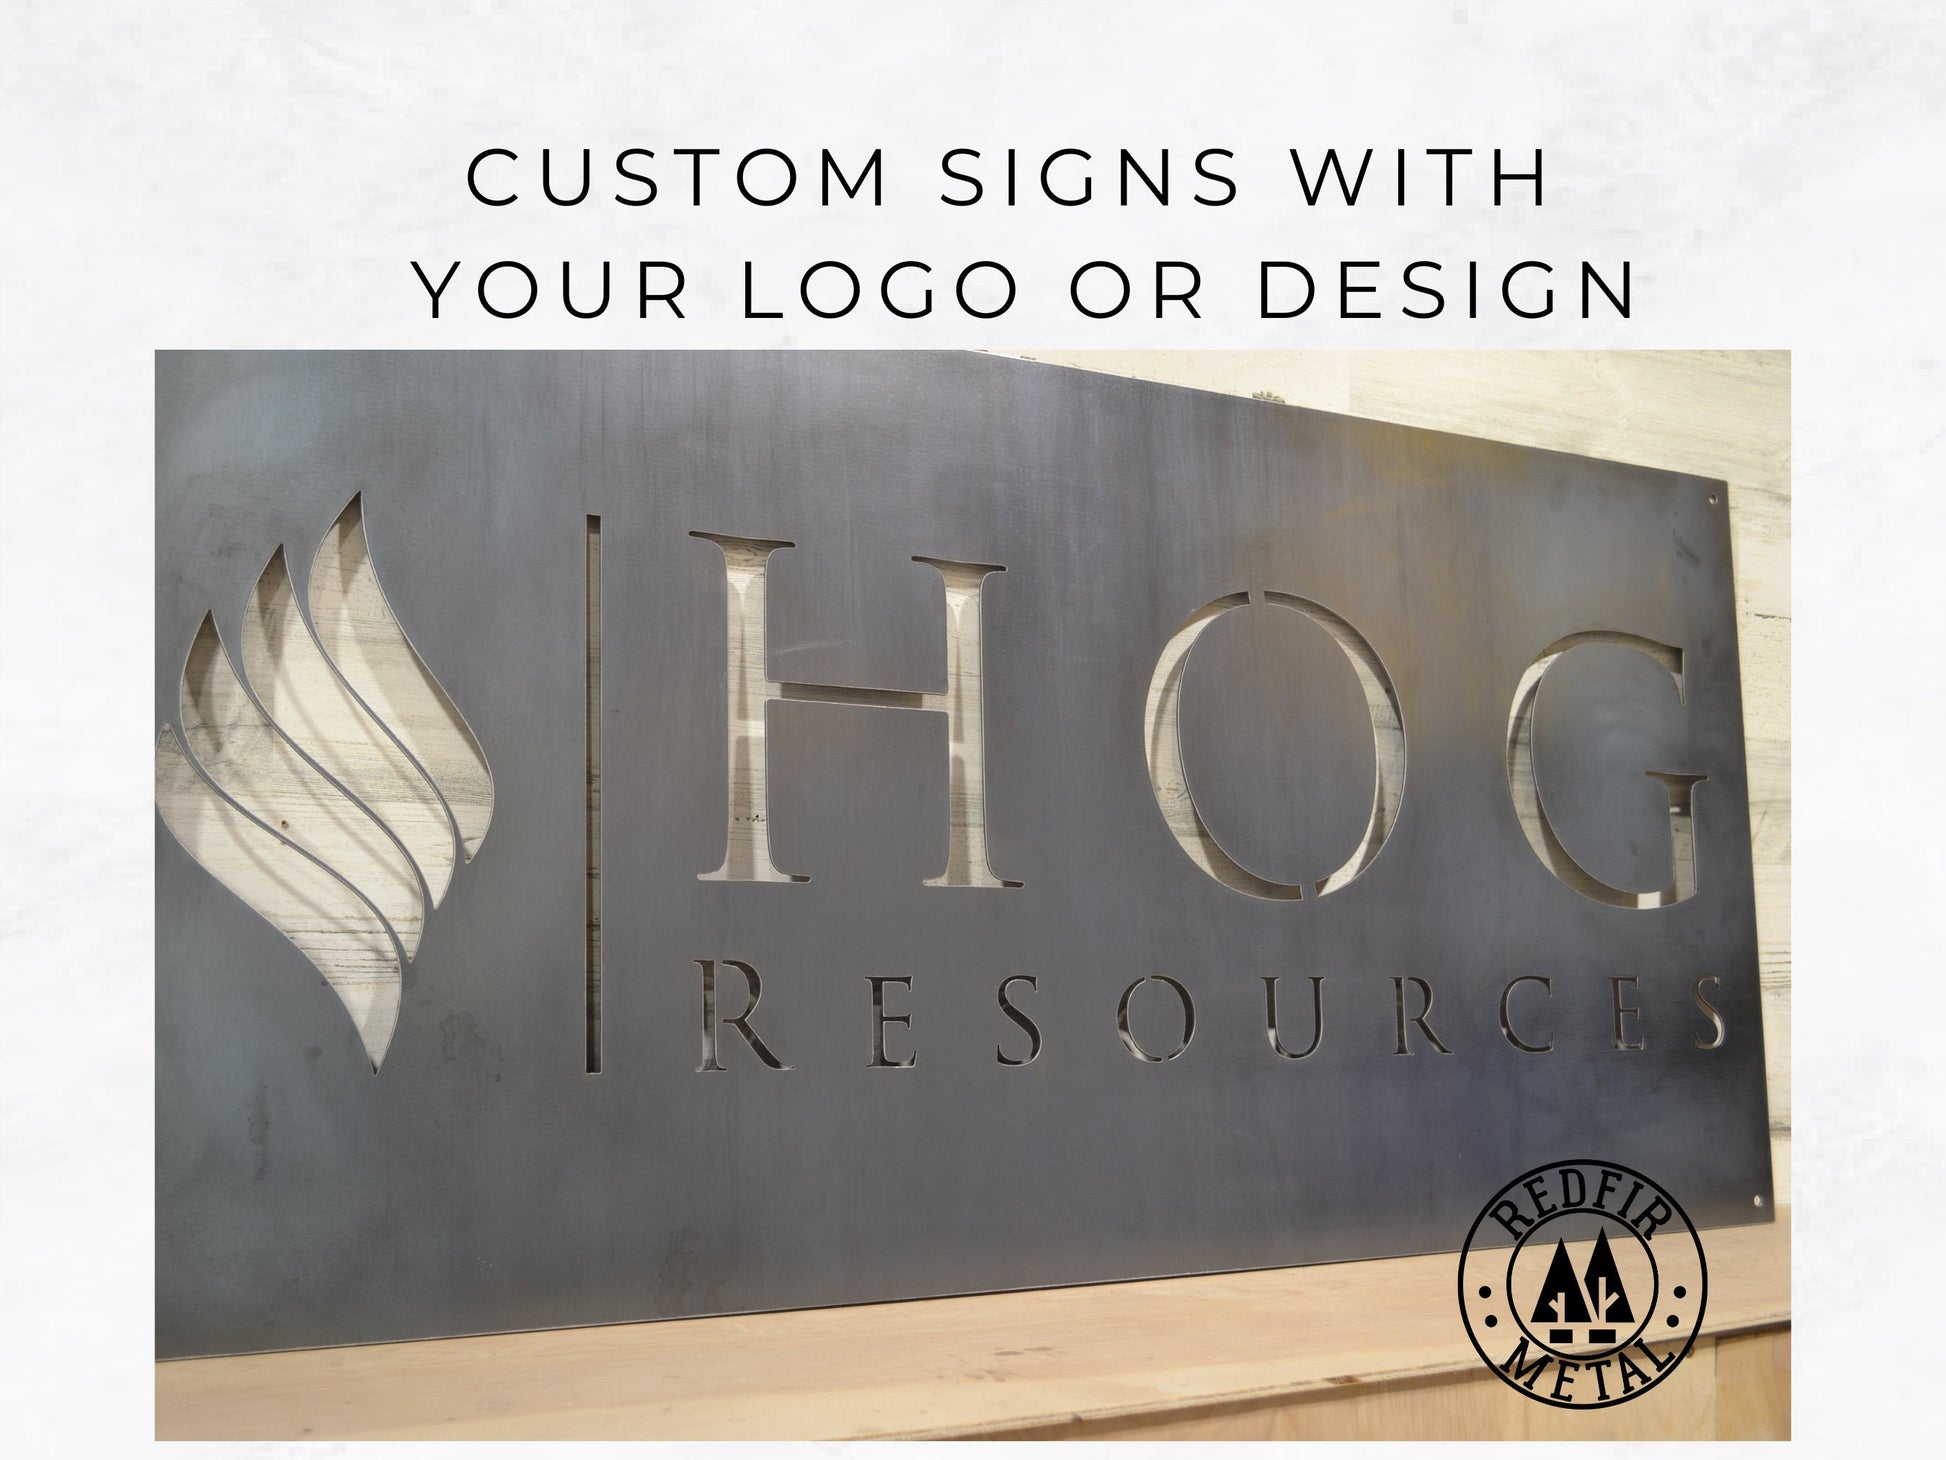 Business Logo or Artwork - Custom Metal Sign - Personalized Gifts - Metal Wall Decor - Large, Small, Square, Circle Sign - Special Gifts